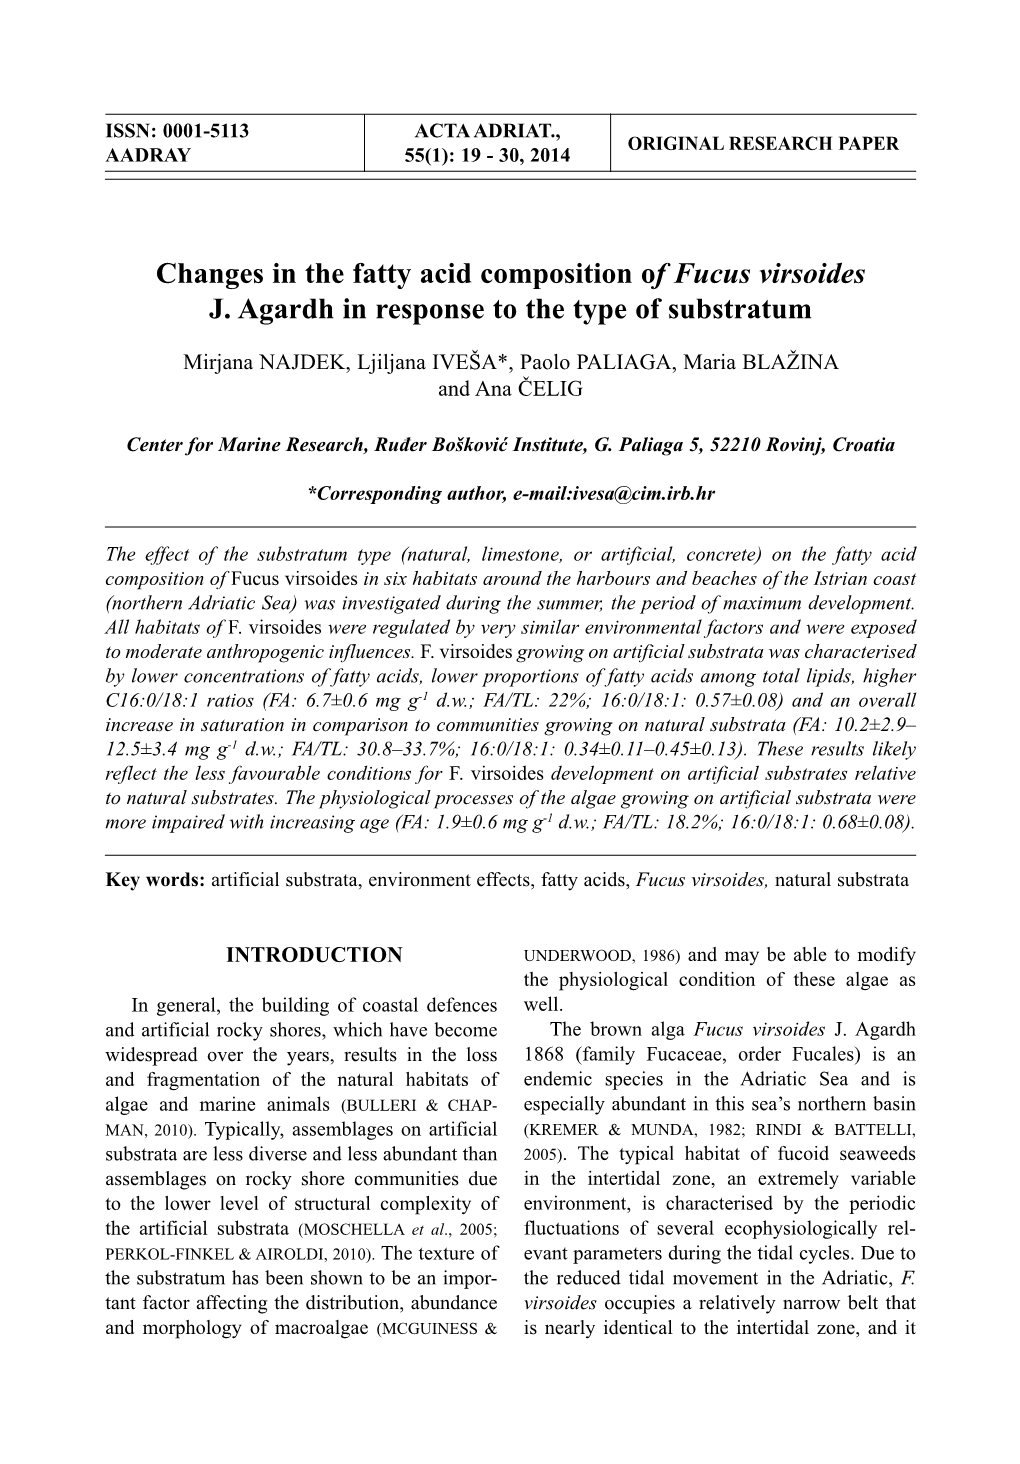 Changes in the Fatty Acid Composition of Fucus Virsoides J. Agardh in Response to the Type of Substratum